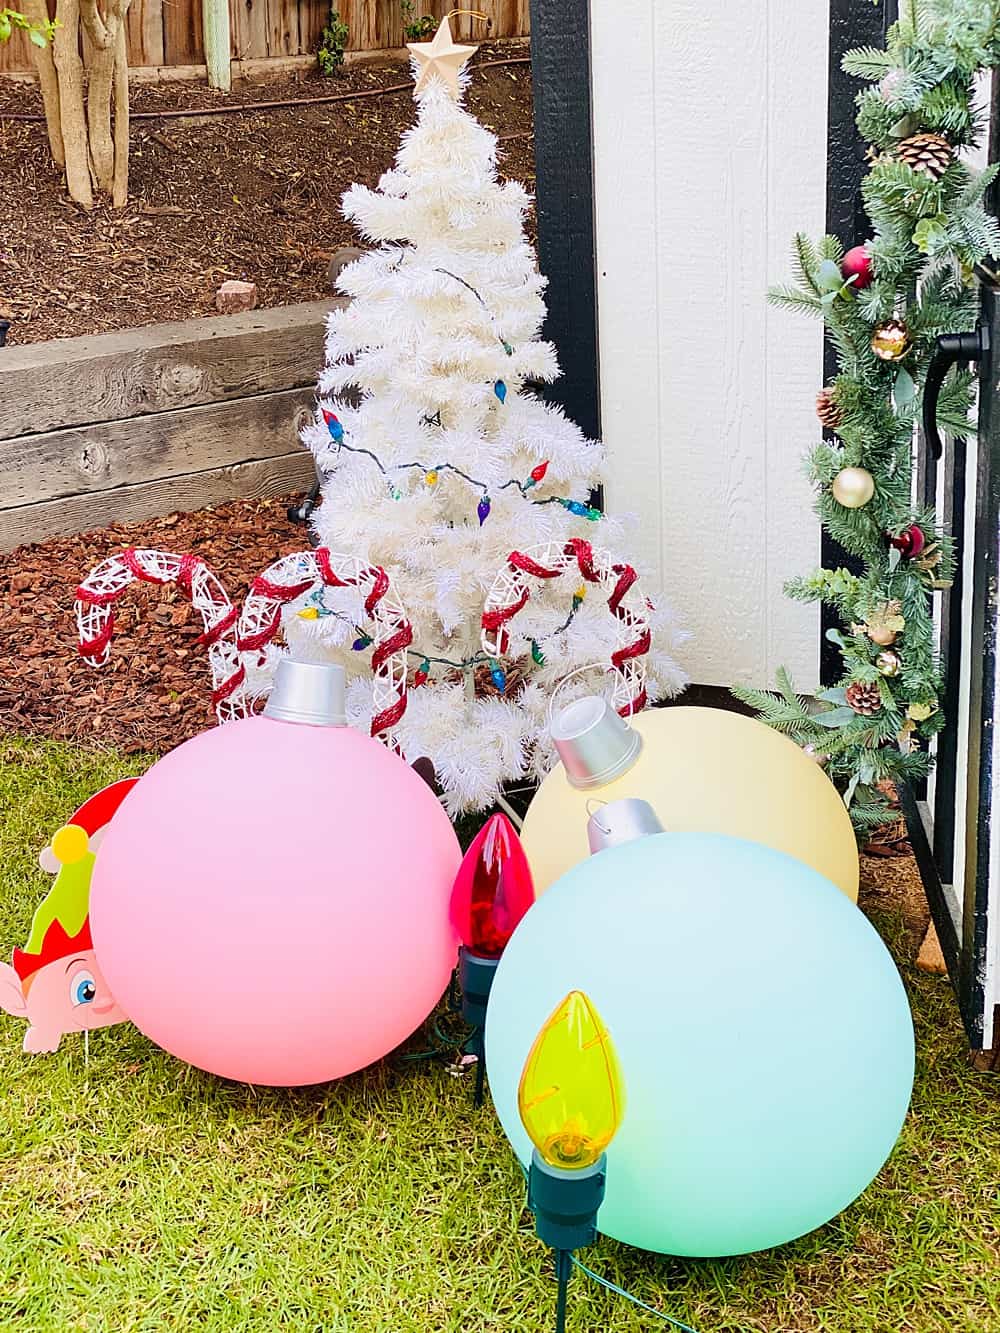 DIY Giant Ornaments Best handmade Christmas ornaments to make!